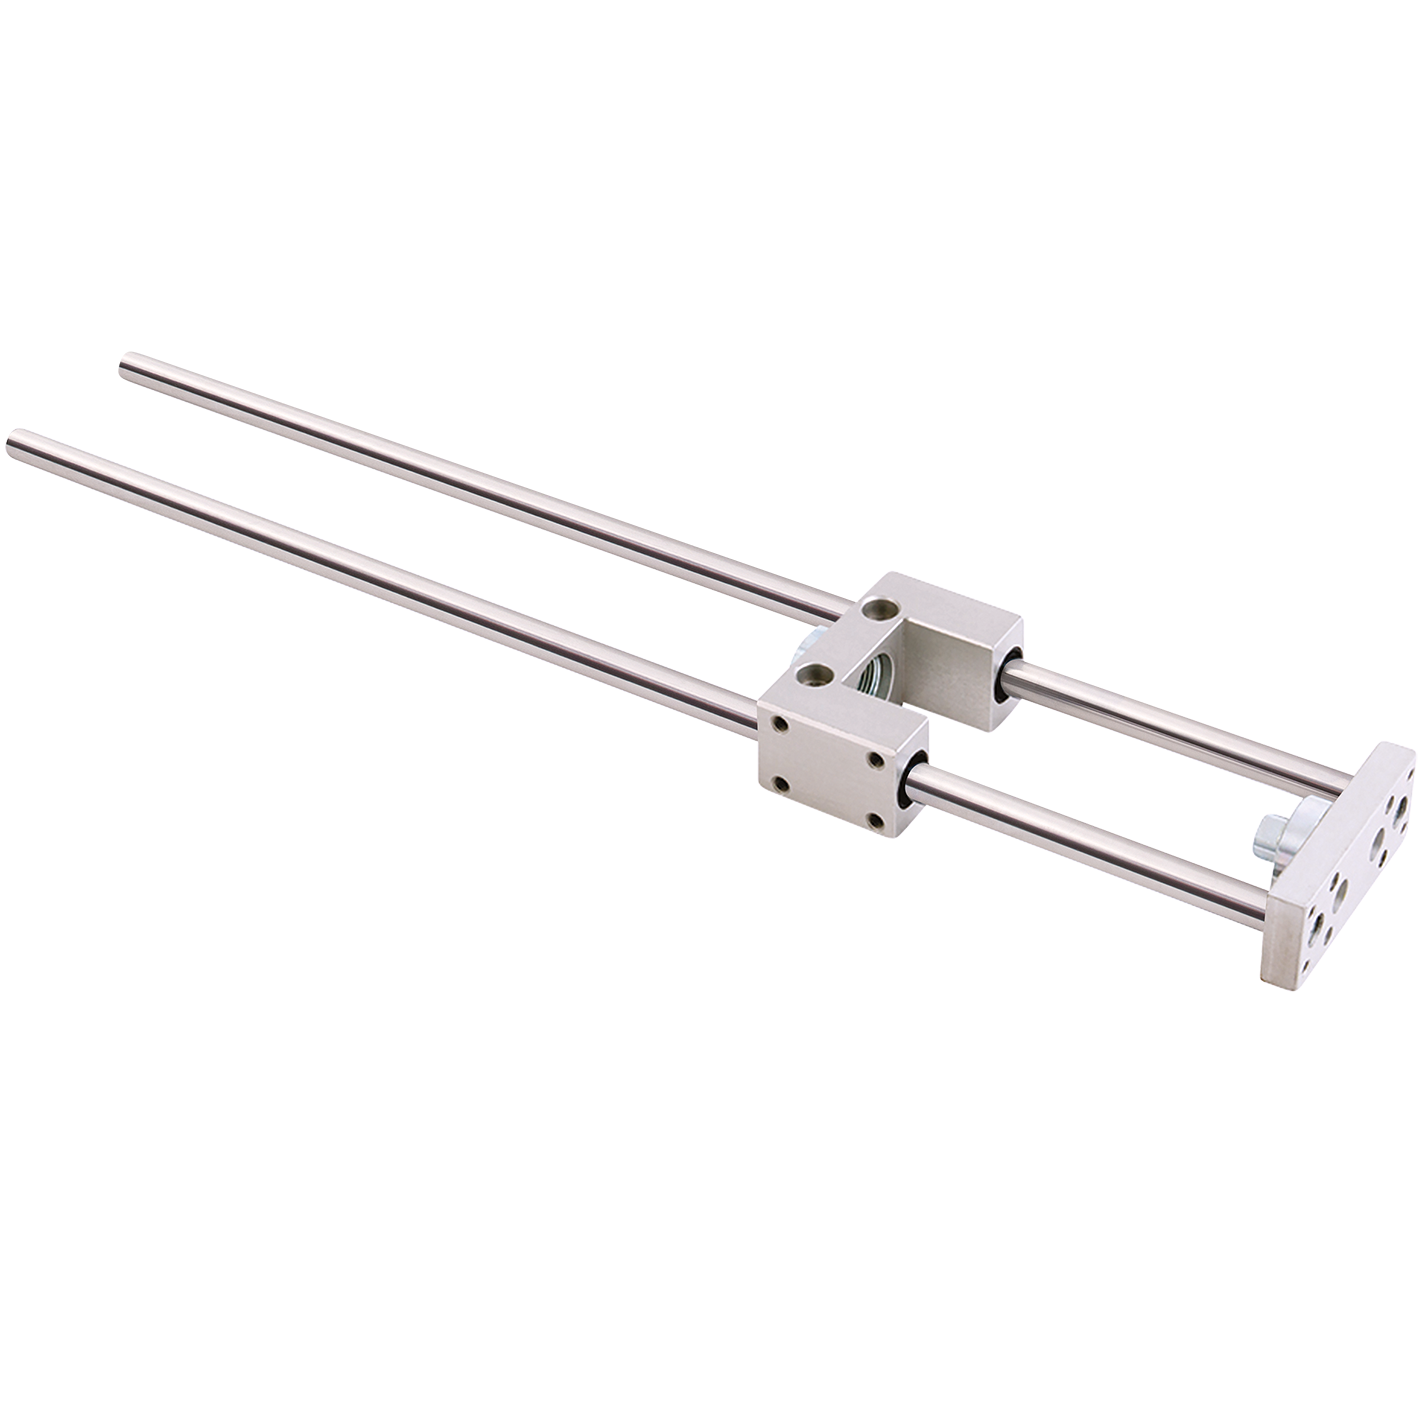 40mm Bore x 320mm Stroke Cylinder Guide Unit